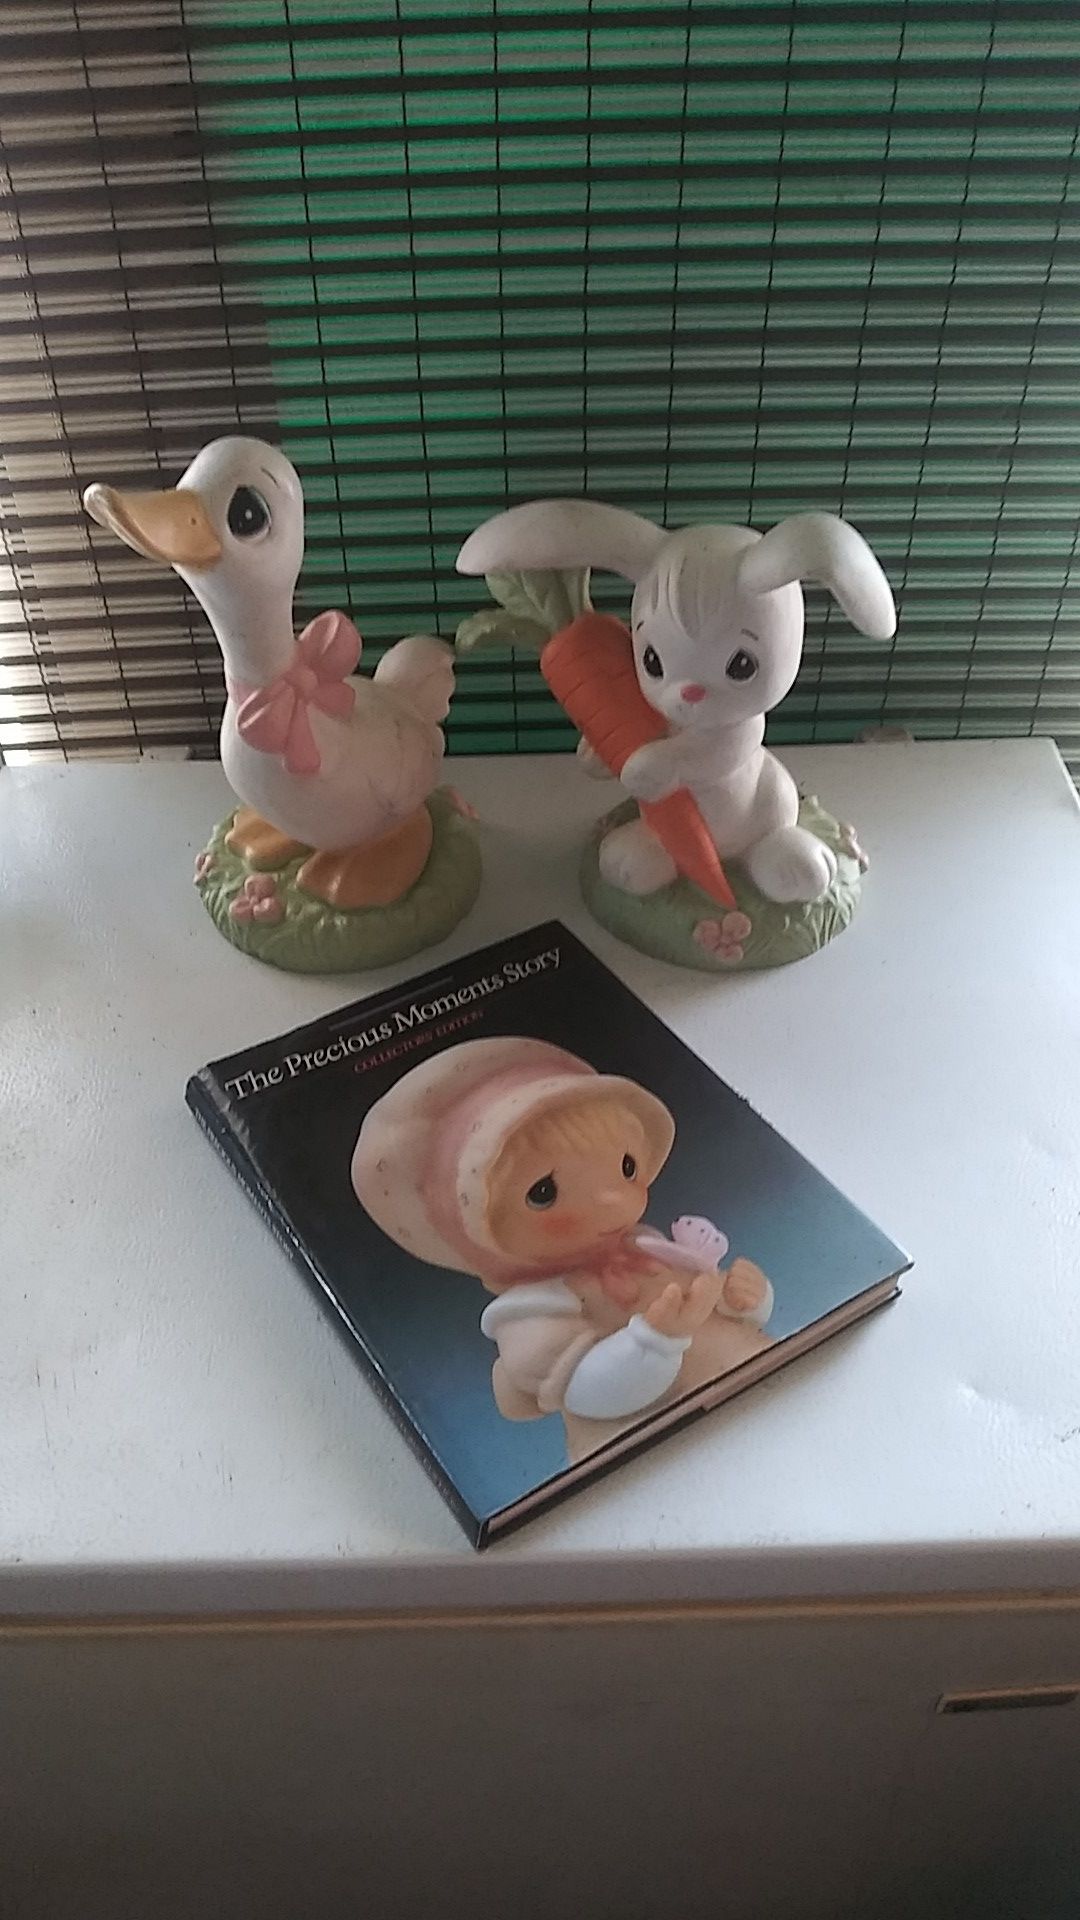 Two Precious Moments figurines and book